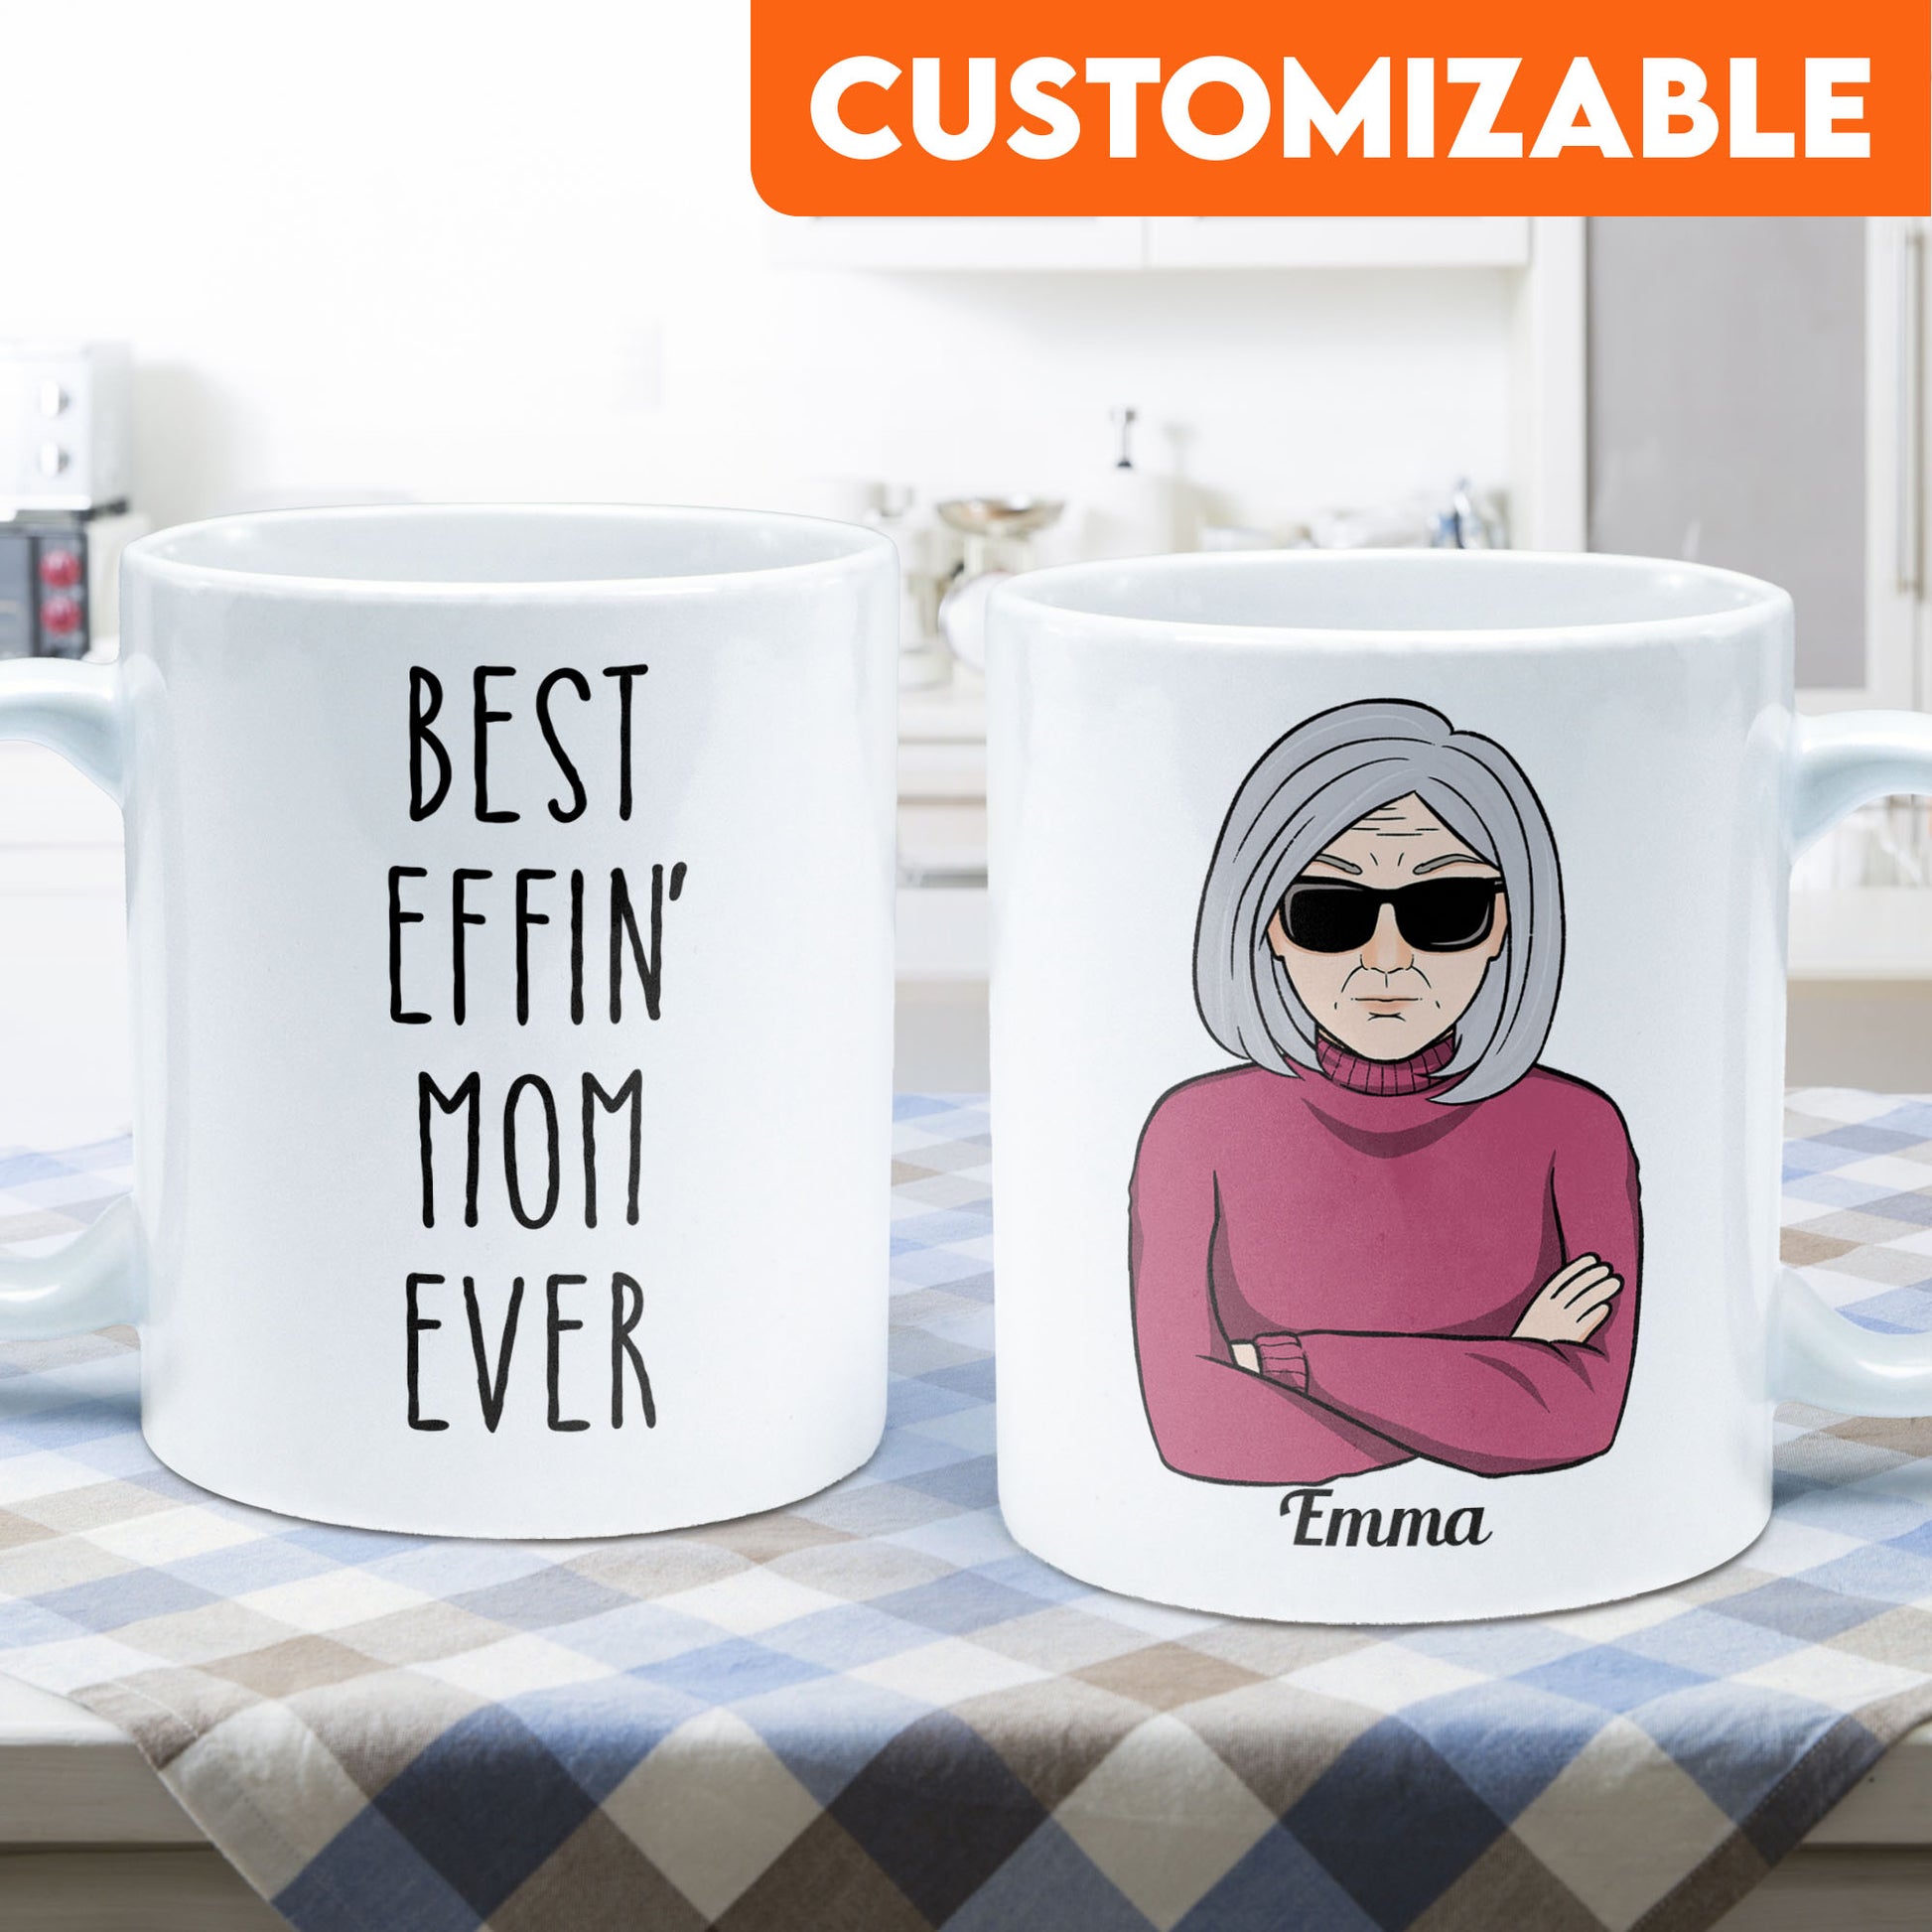 Funny Mom Mug - Sorry You P-e Yourself - Best Christmas Gifts for Mom,  Women - Unique Xmas Gag Mom Gifts from Daughter, Son, Kids - Fun Birthday